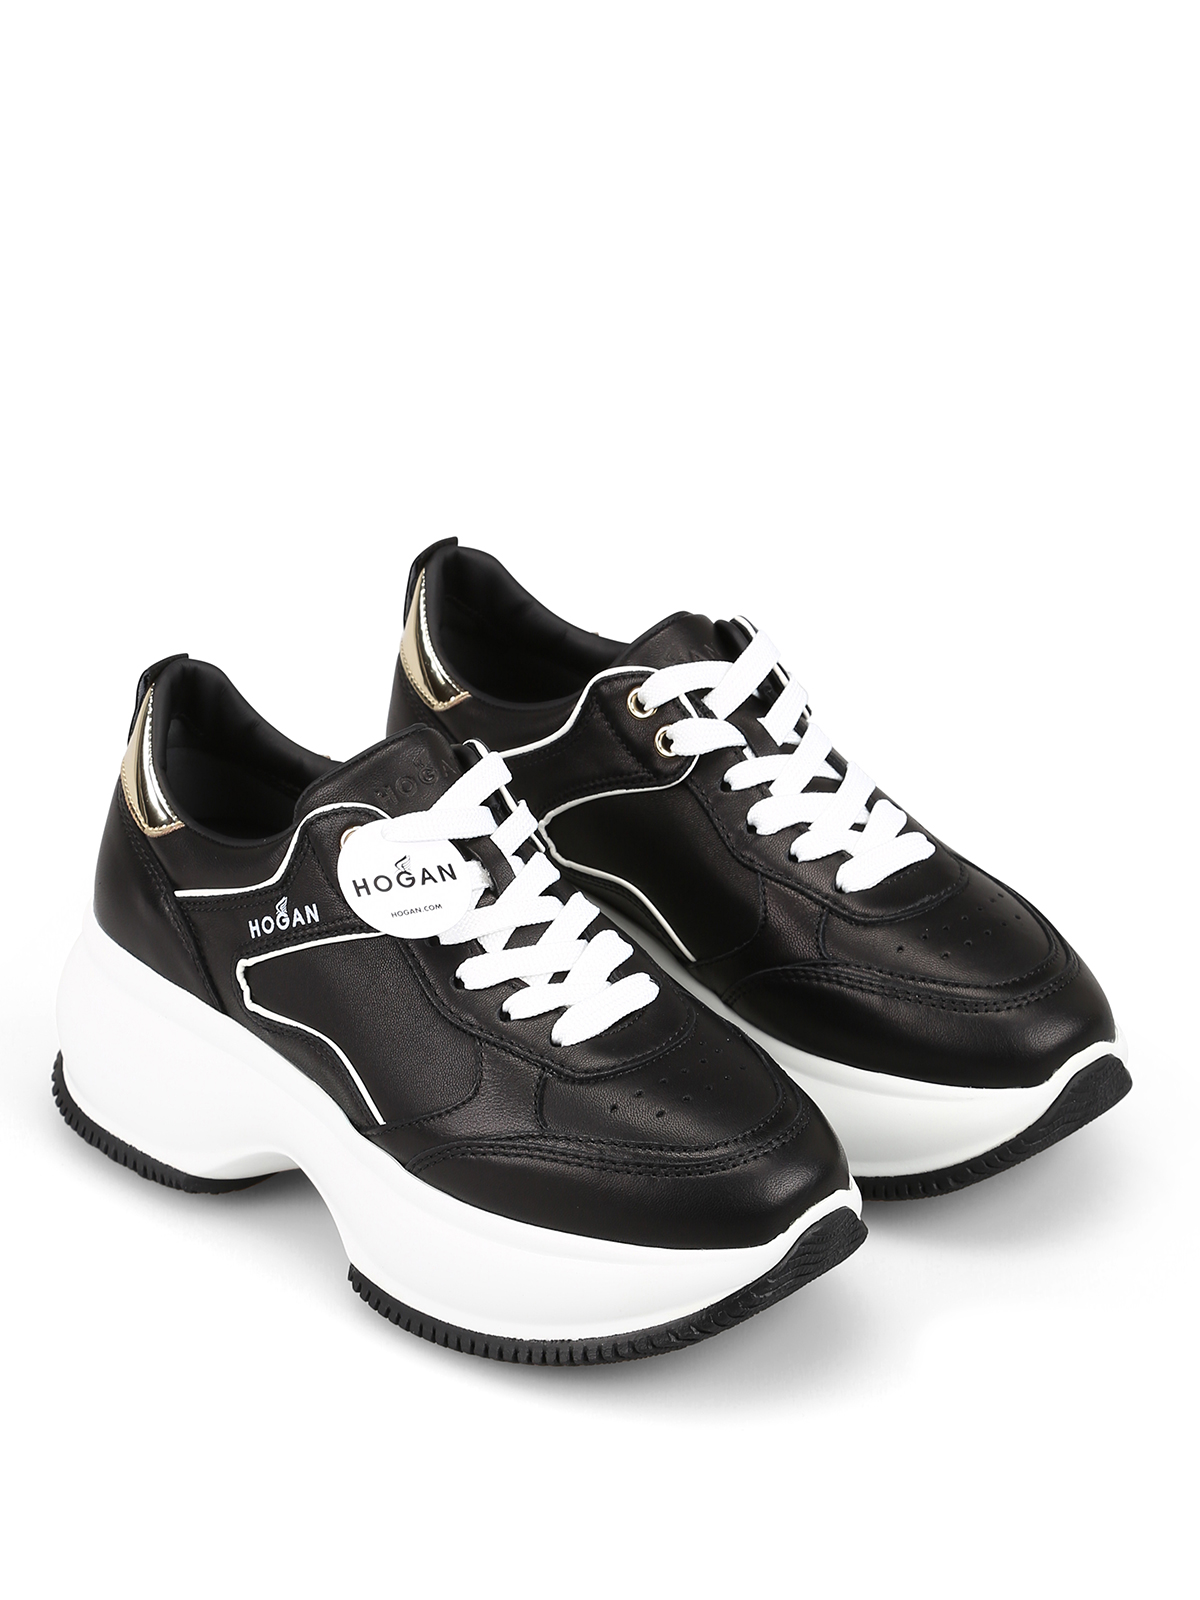 Hogan - Maxi I Active black leather sneakers - trainers ...